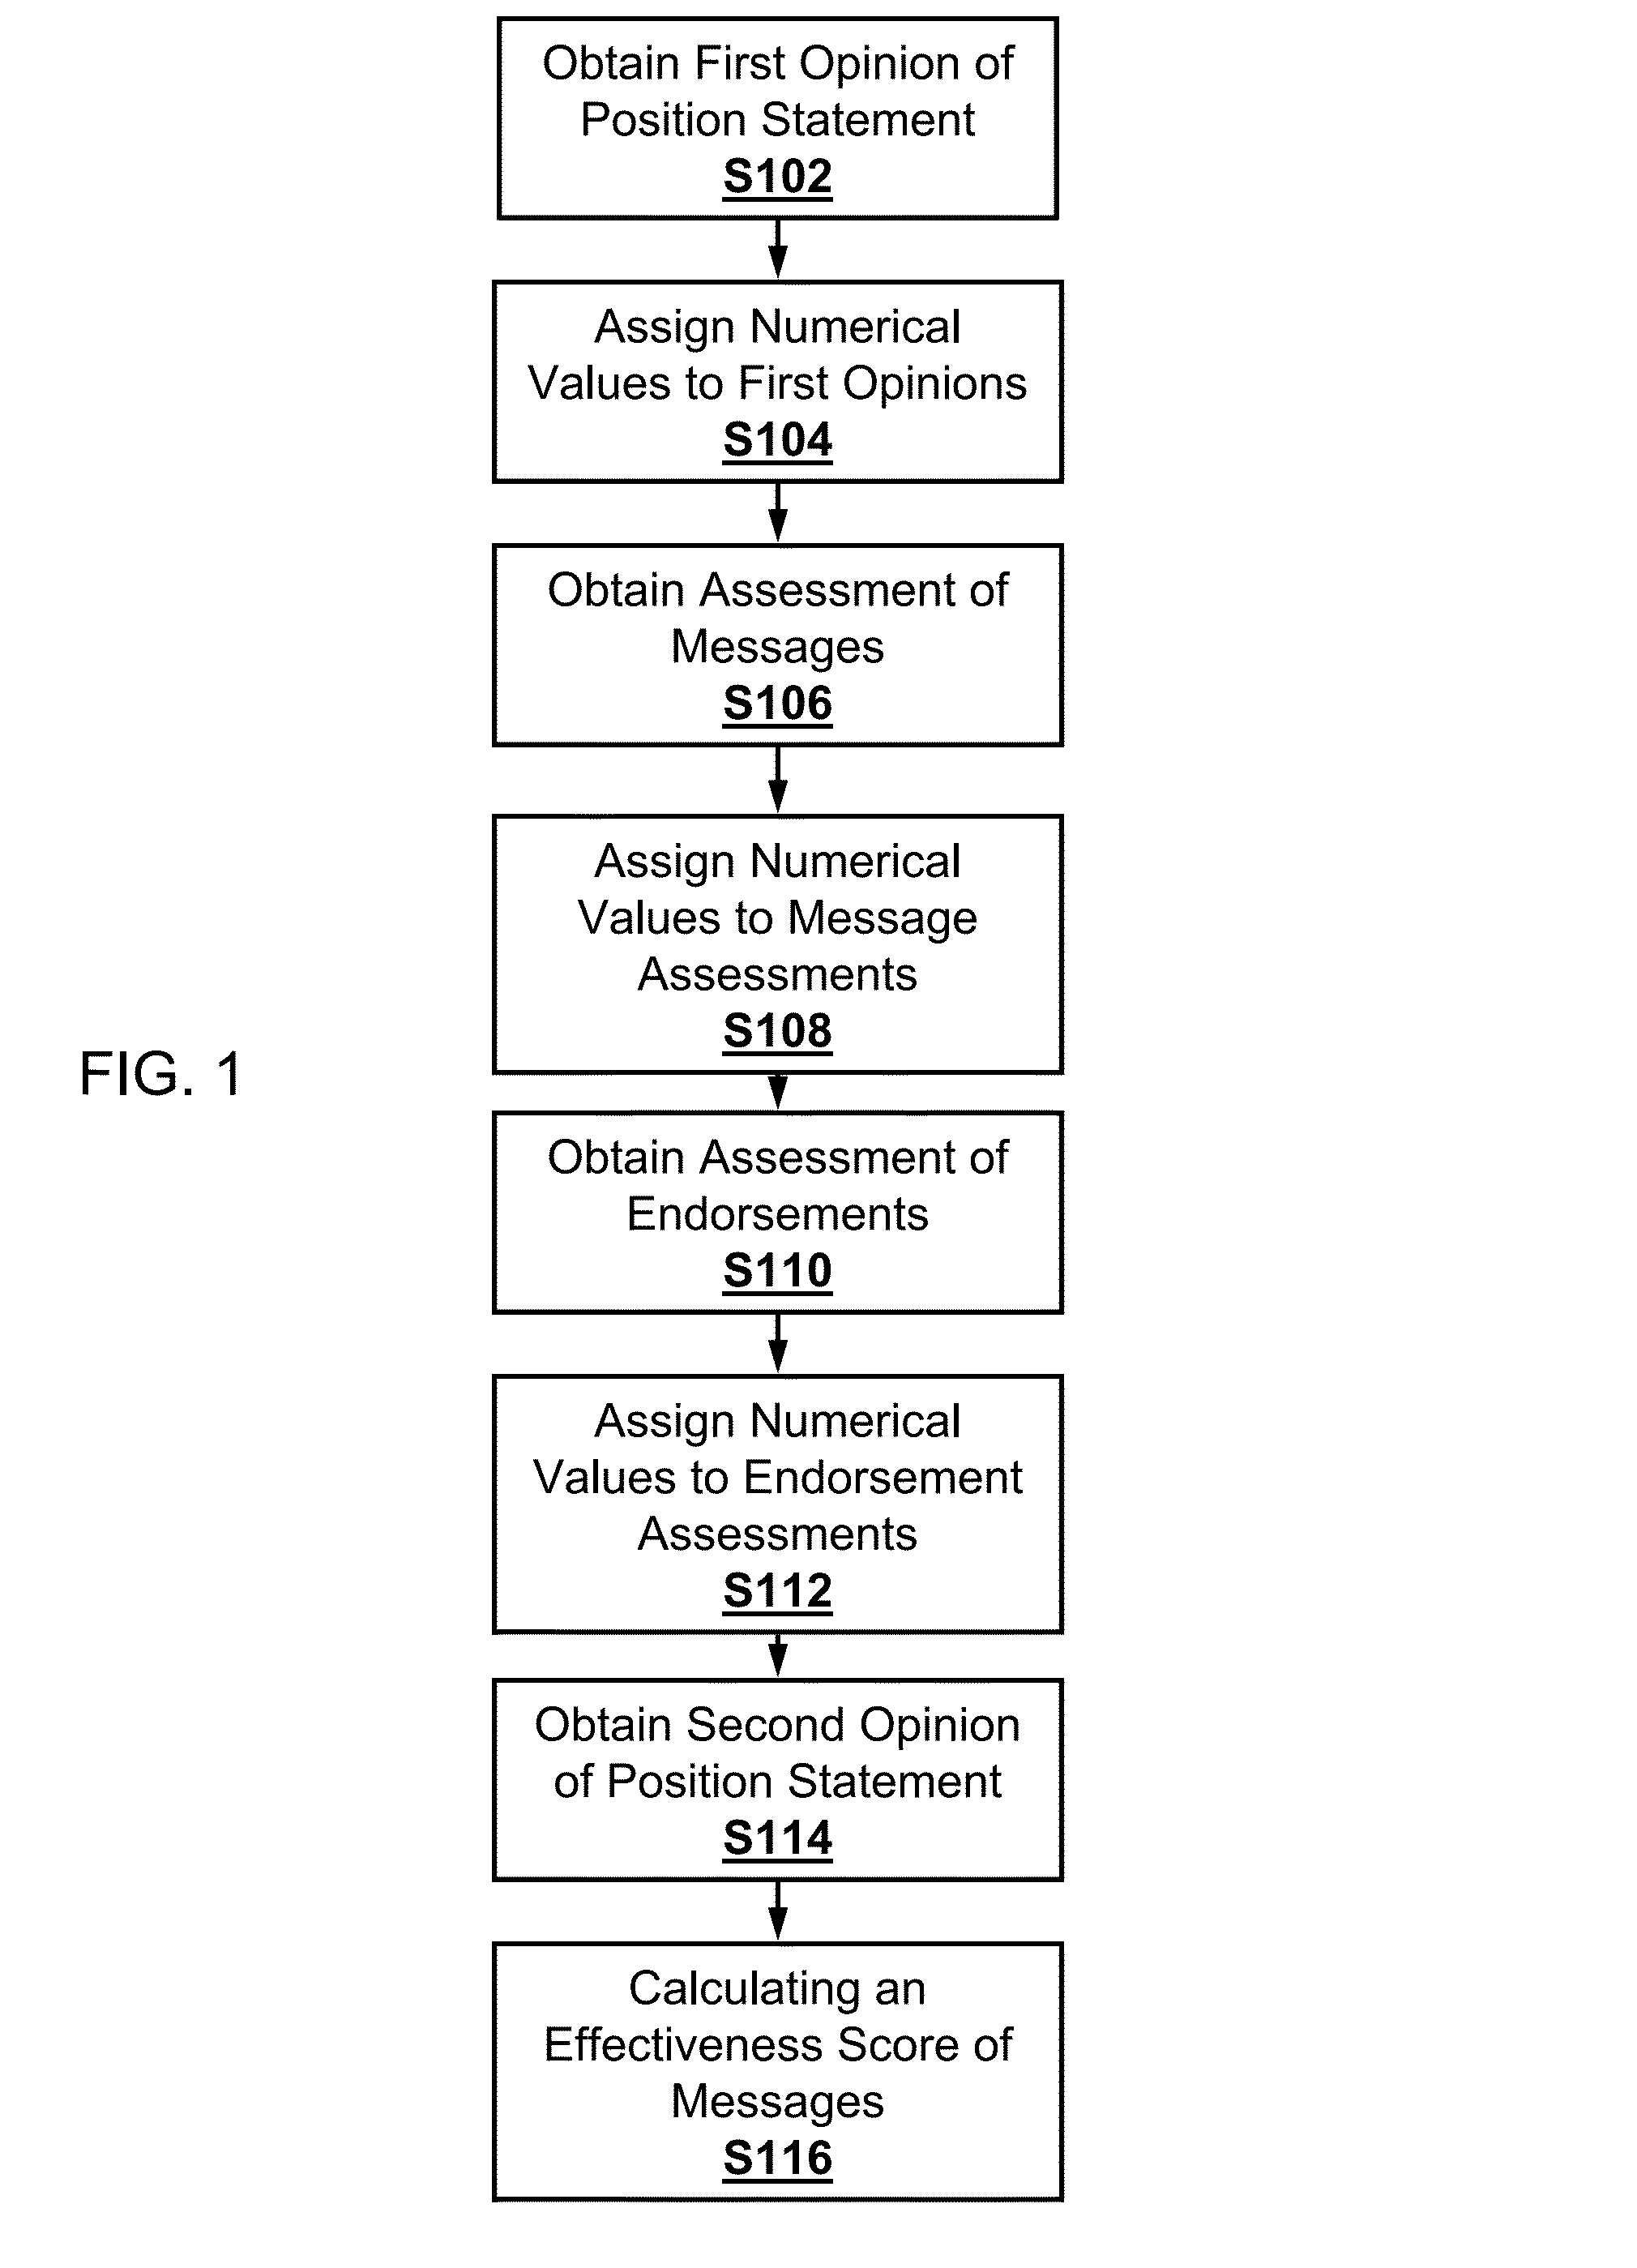 Systems and methods for measuring and scoring the effectiveness of a message